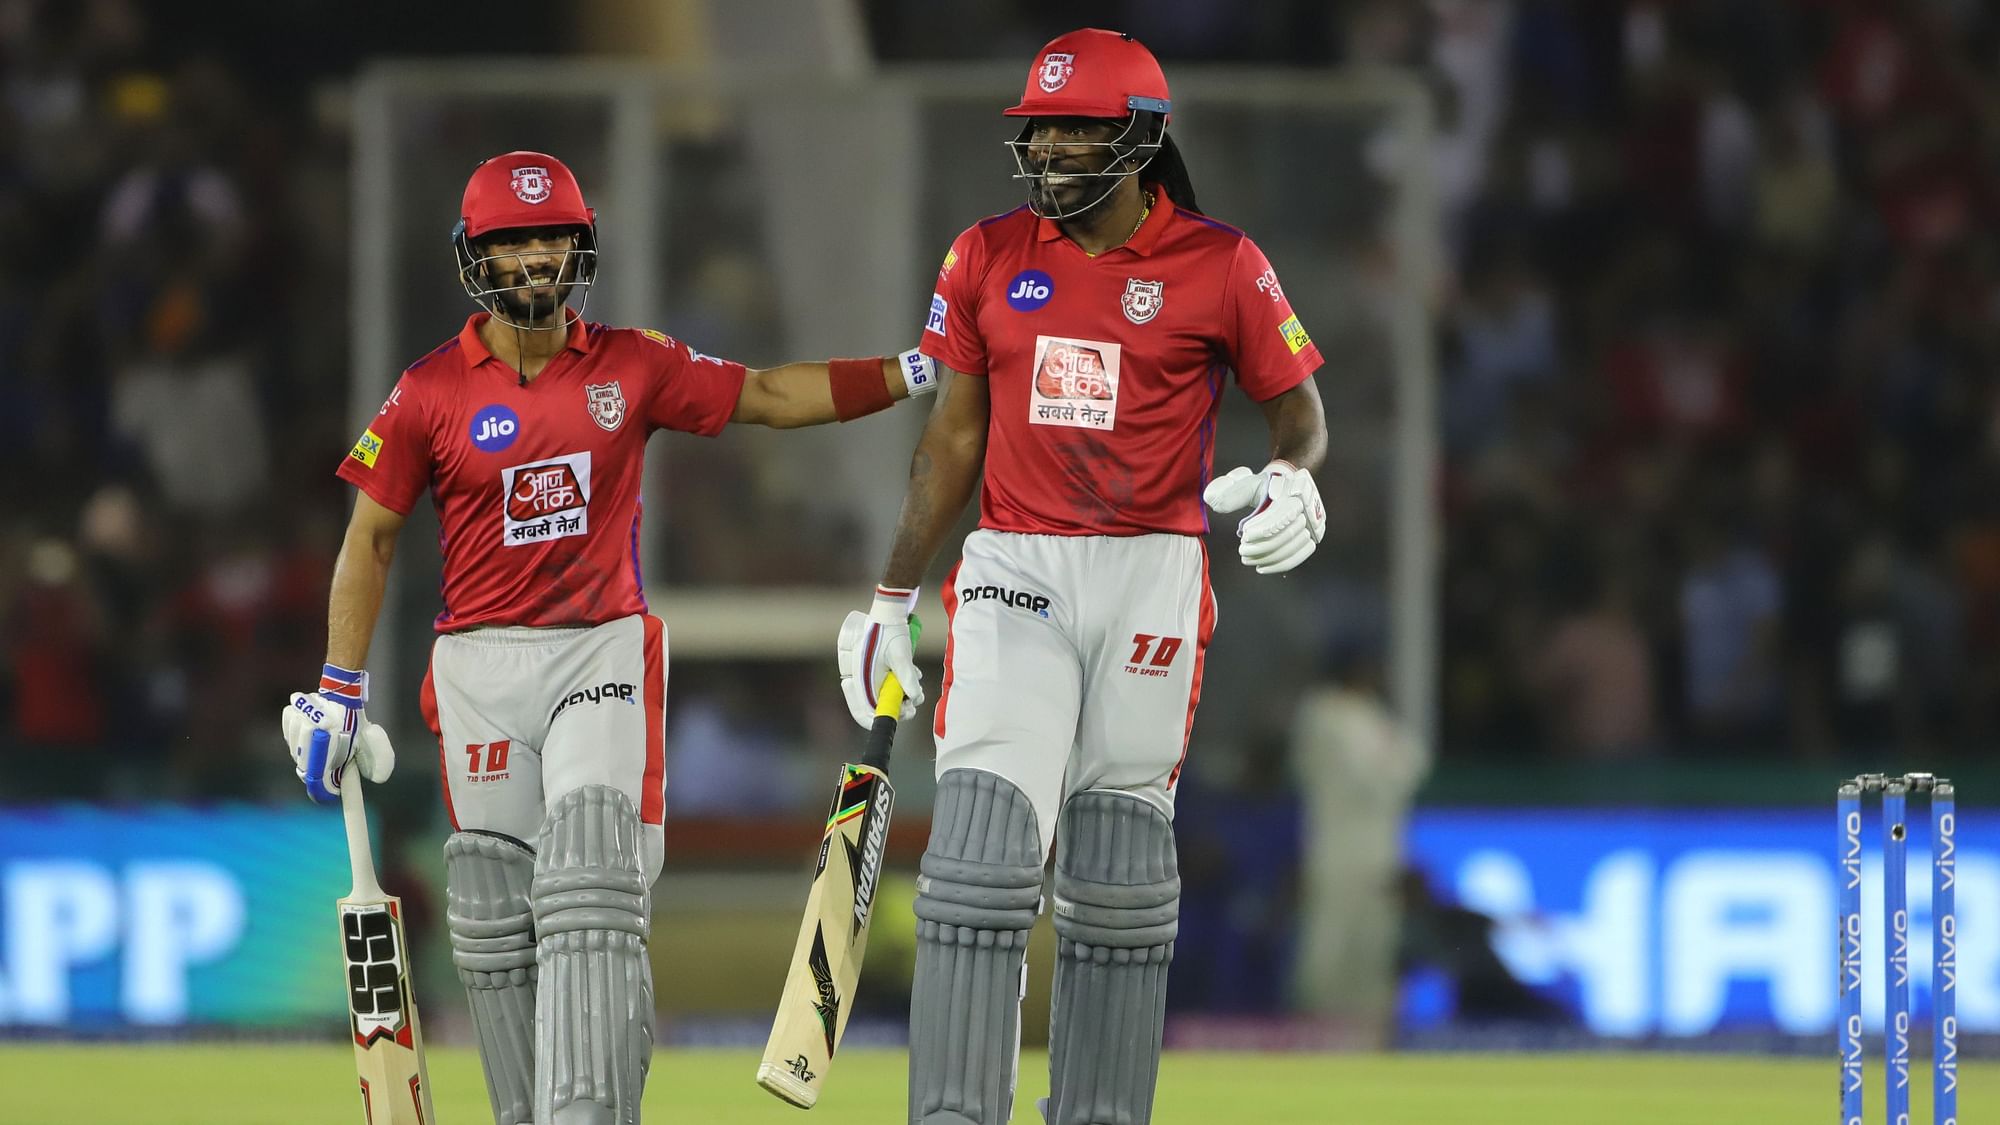 Kings XI Punjab IPL 2020 Squad: A look at Kings XI Punjab’s team sheet and auction purse after the players retentions.&nbsp;